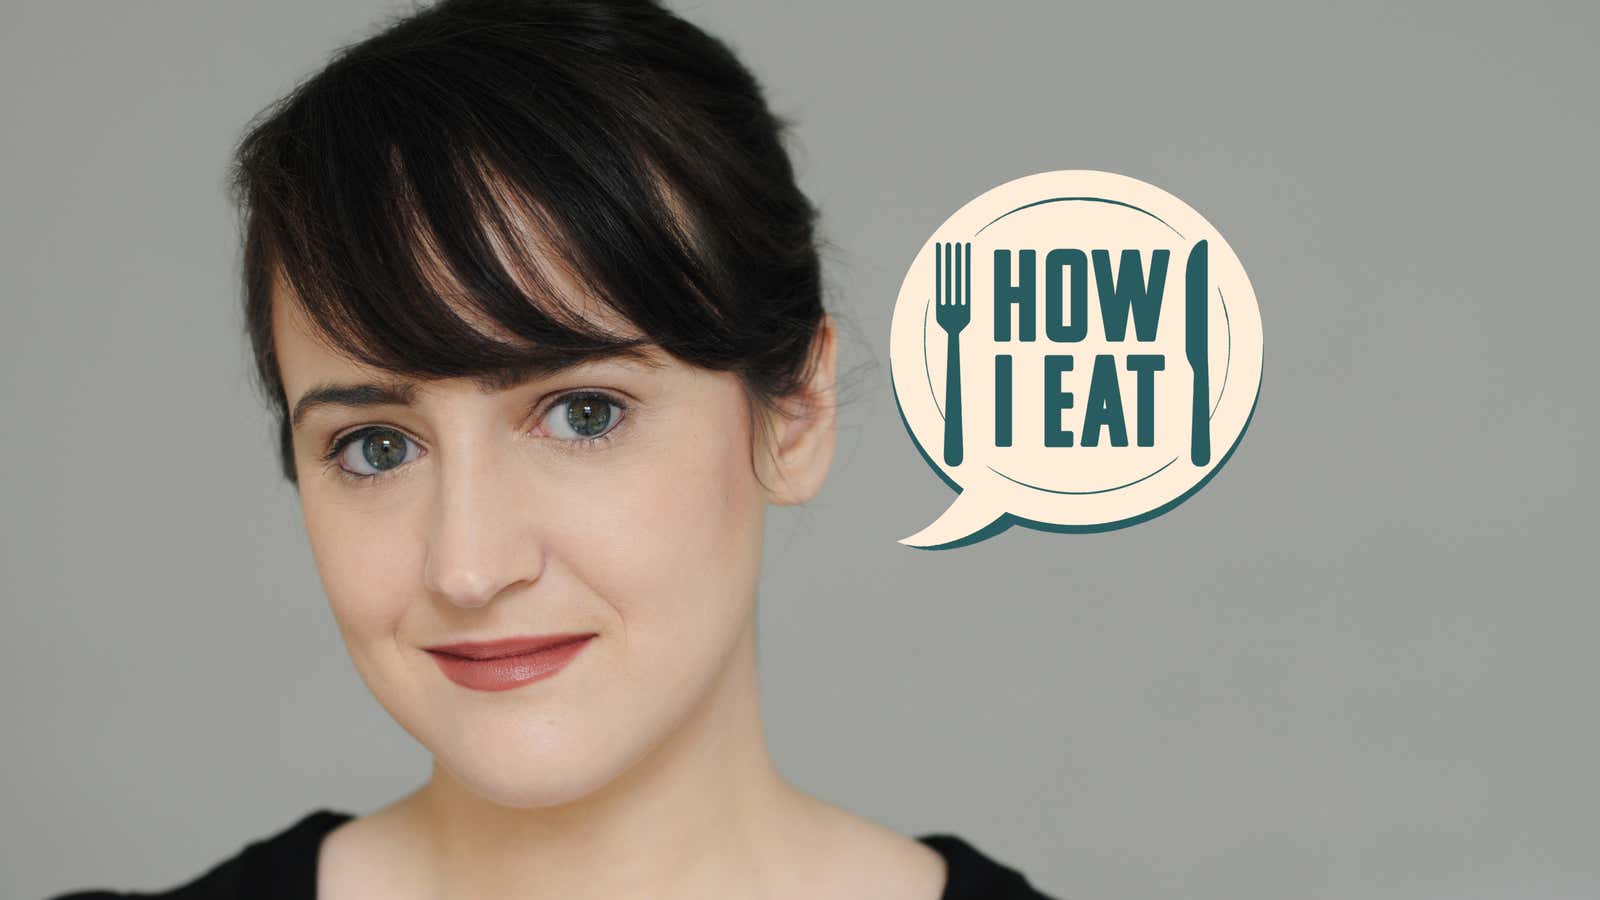 I'm Actress and Writer Mara Wilson, and This Is How I Eat